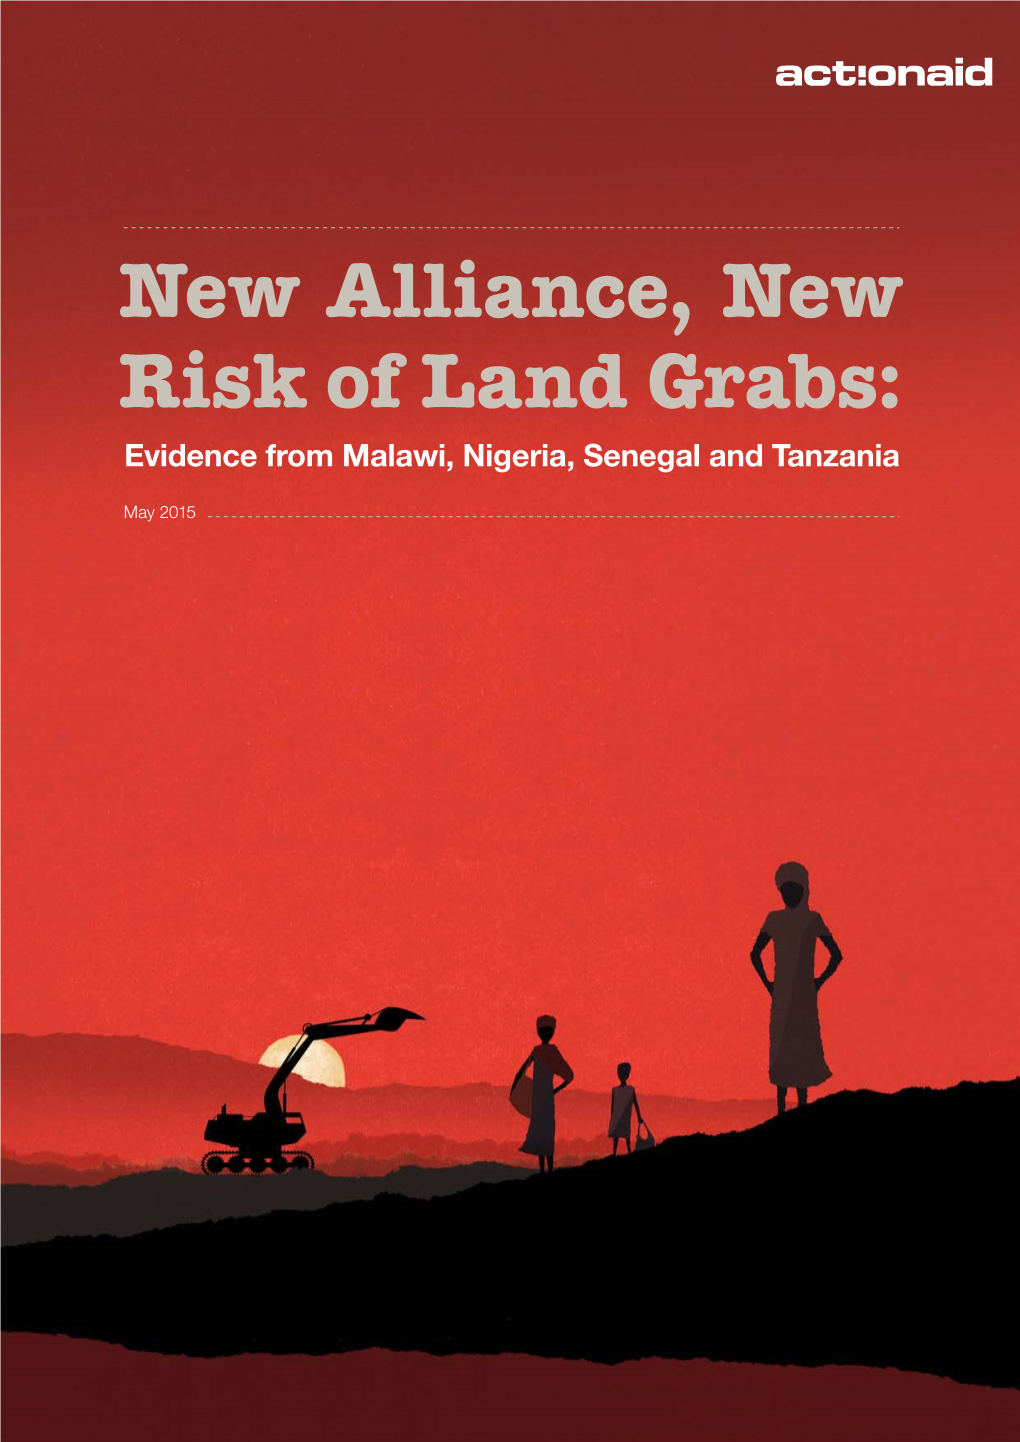 New Alliance, New Risk of Land Grabs: Evidence from Malawi, Nigeria, Senegal and Tanzania